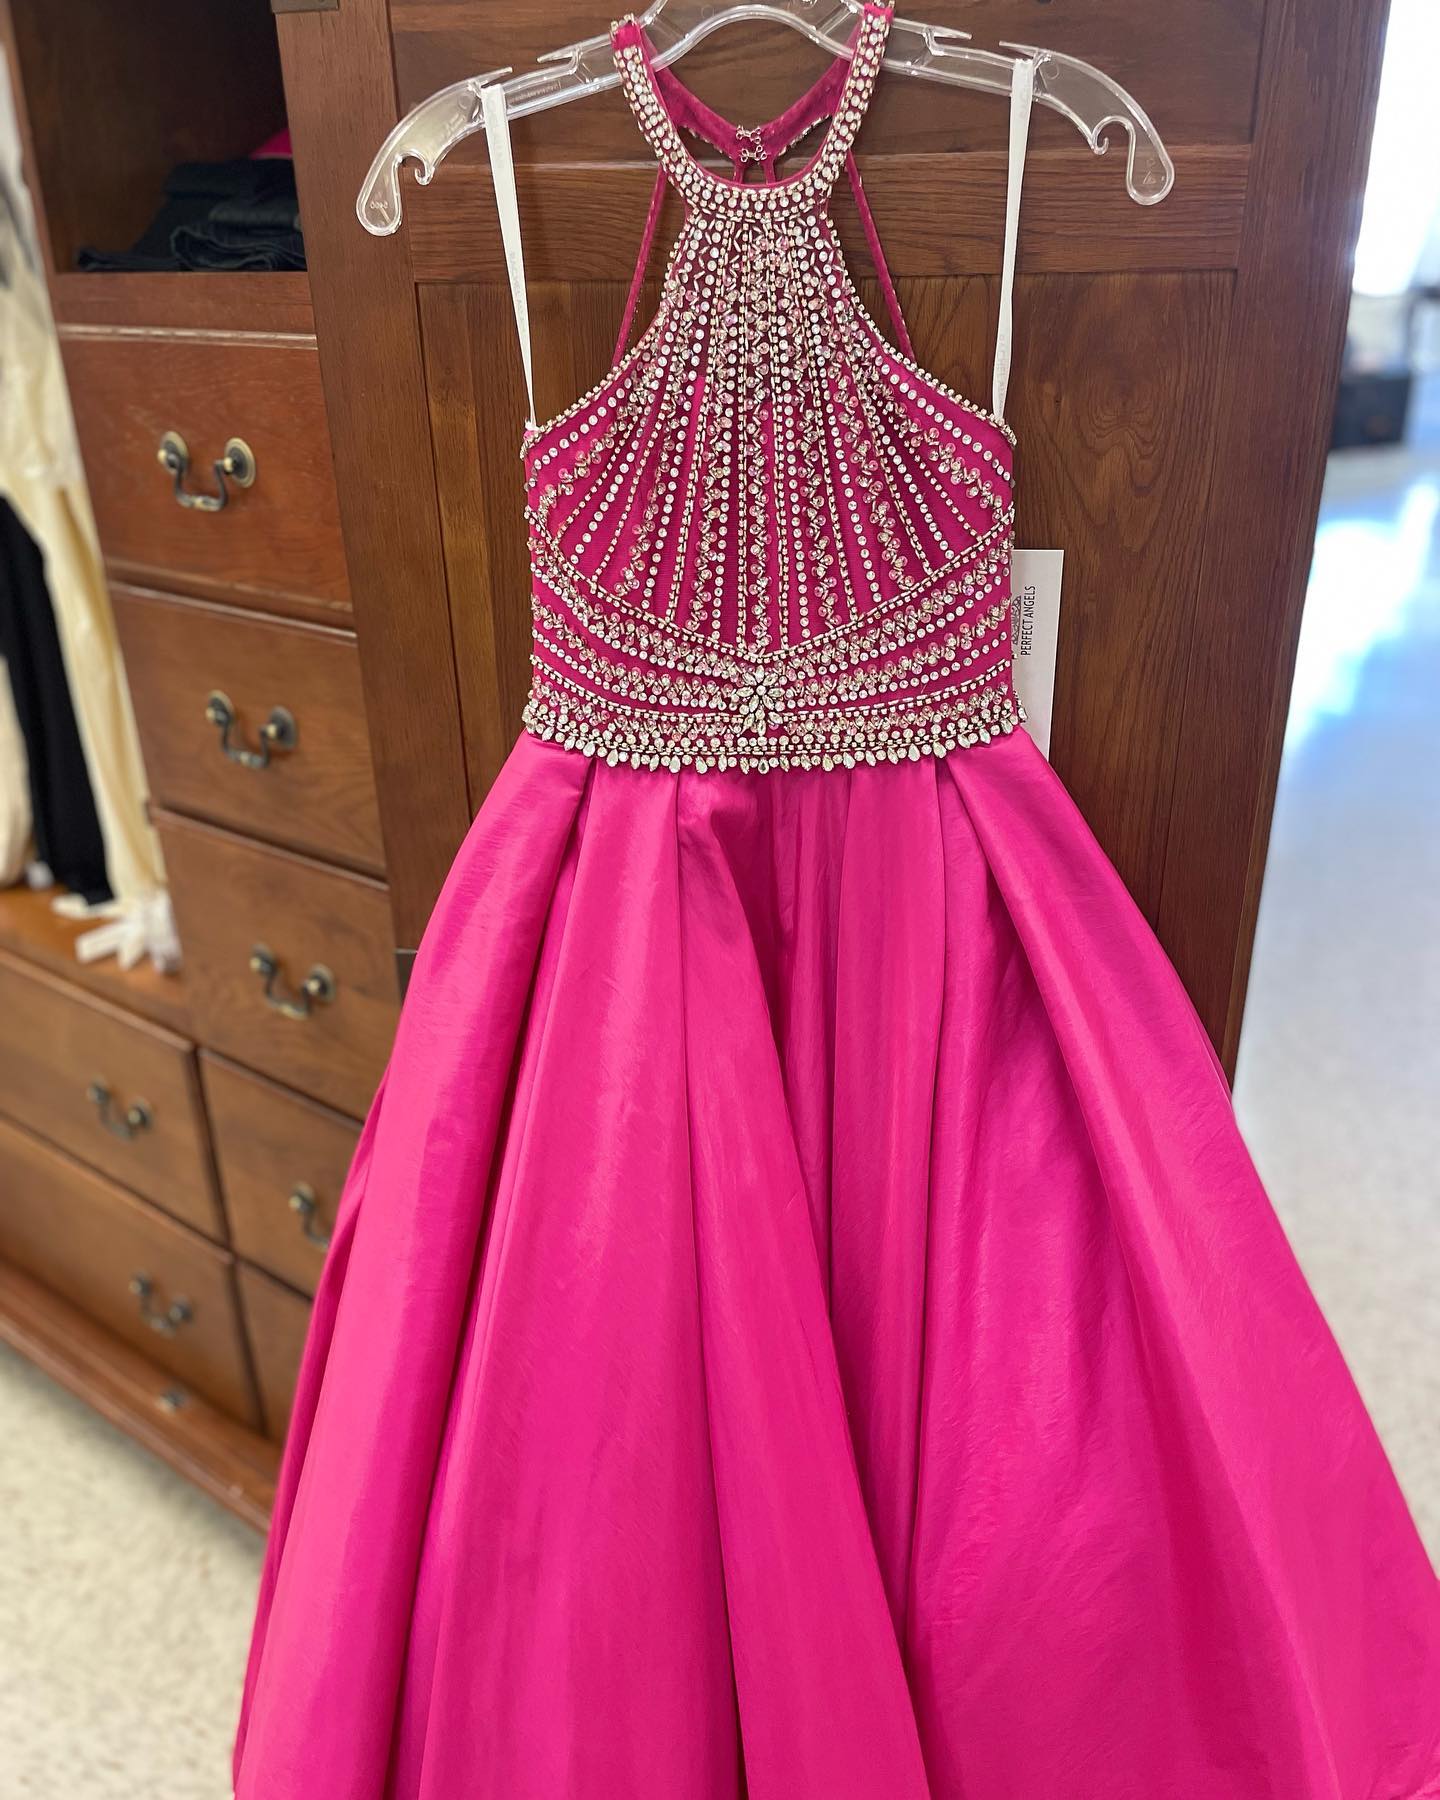 Little Miss Pageant Dress for Teens Junior Toddler 2023 Perline AB Stones Crystal Long Girl Pageant Gown Formal Party Runway Red Carpet ritzee Fuchsia Taffetà Halter